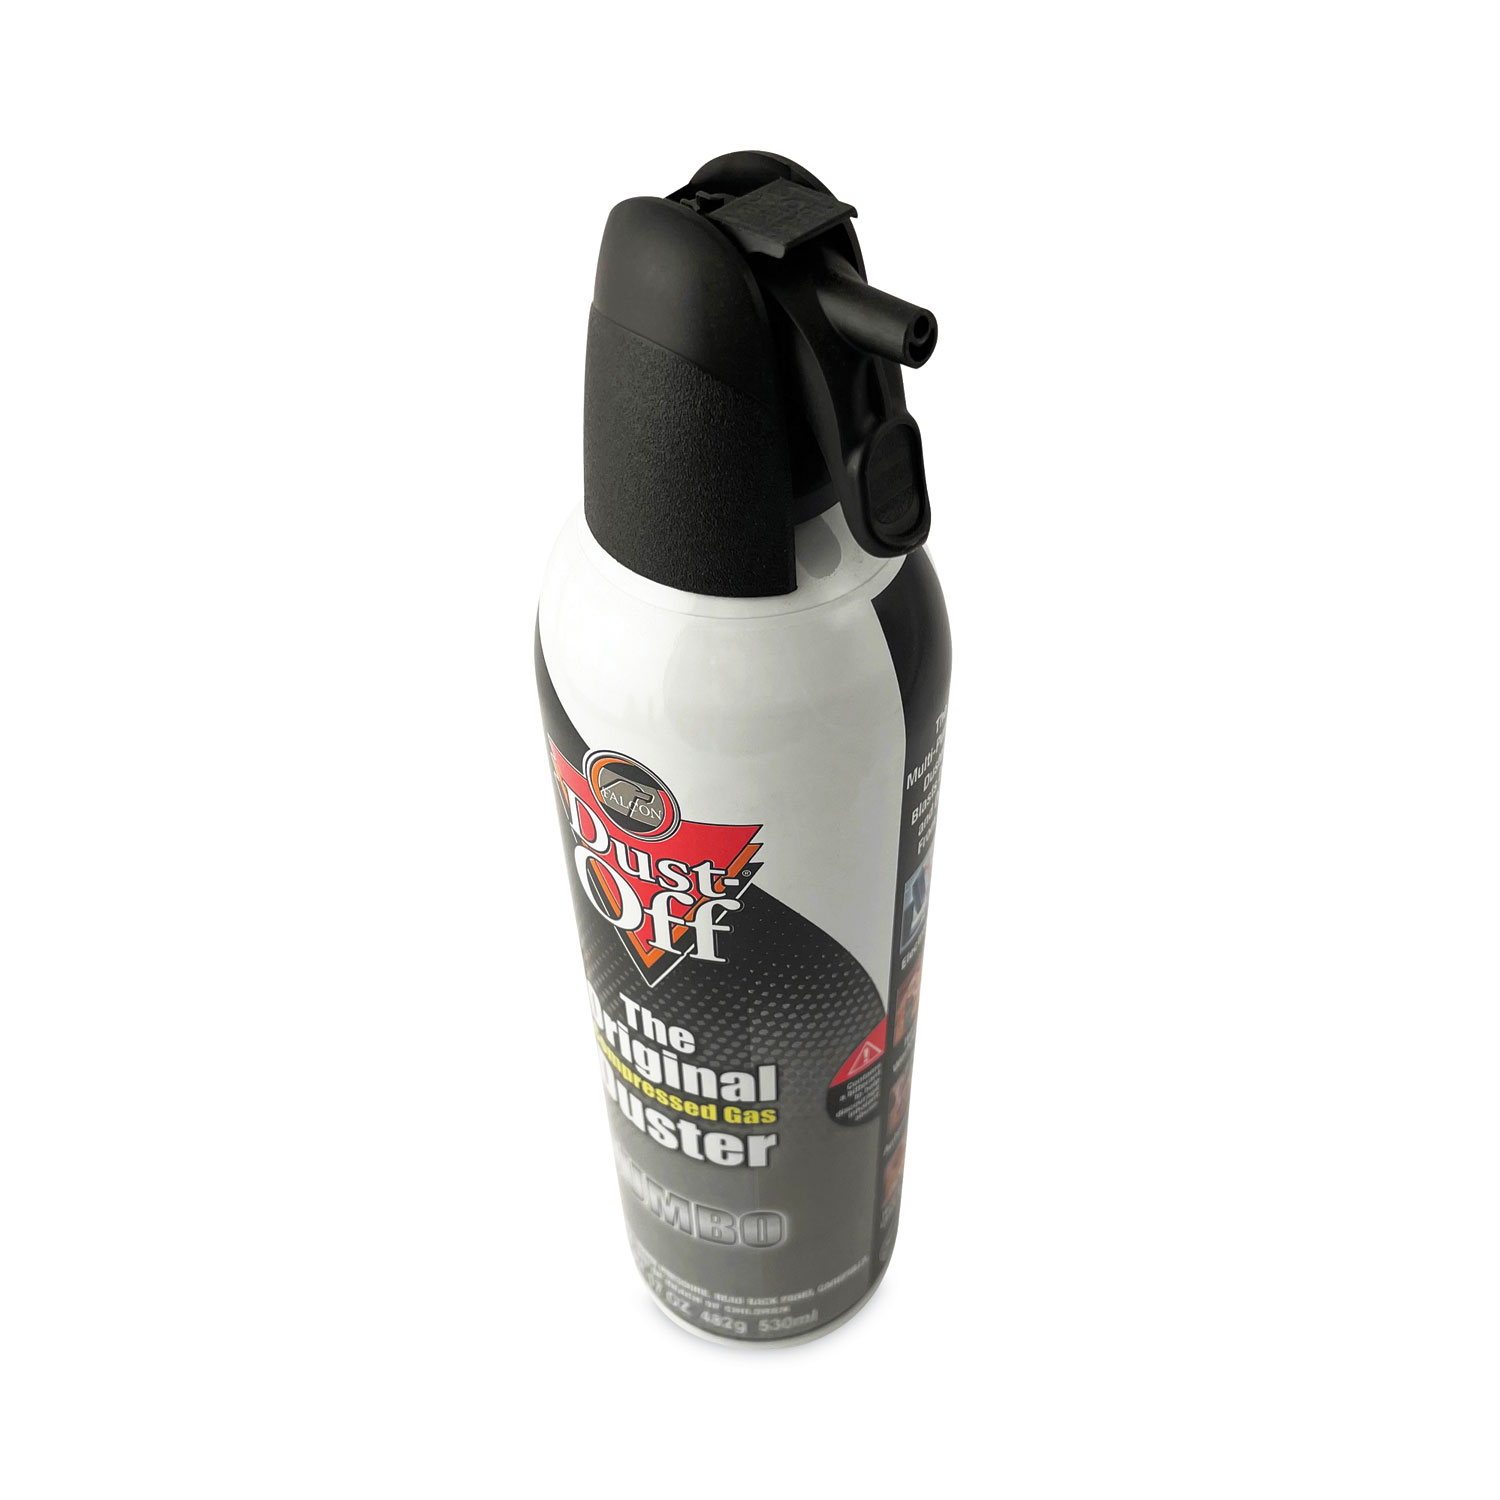 Dust-Off Duster Compressed Gas Instant Dust Remover, 4 pk./10 oz.